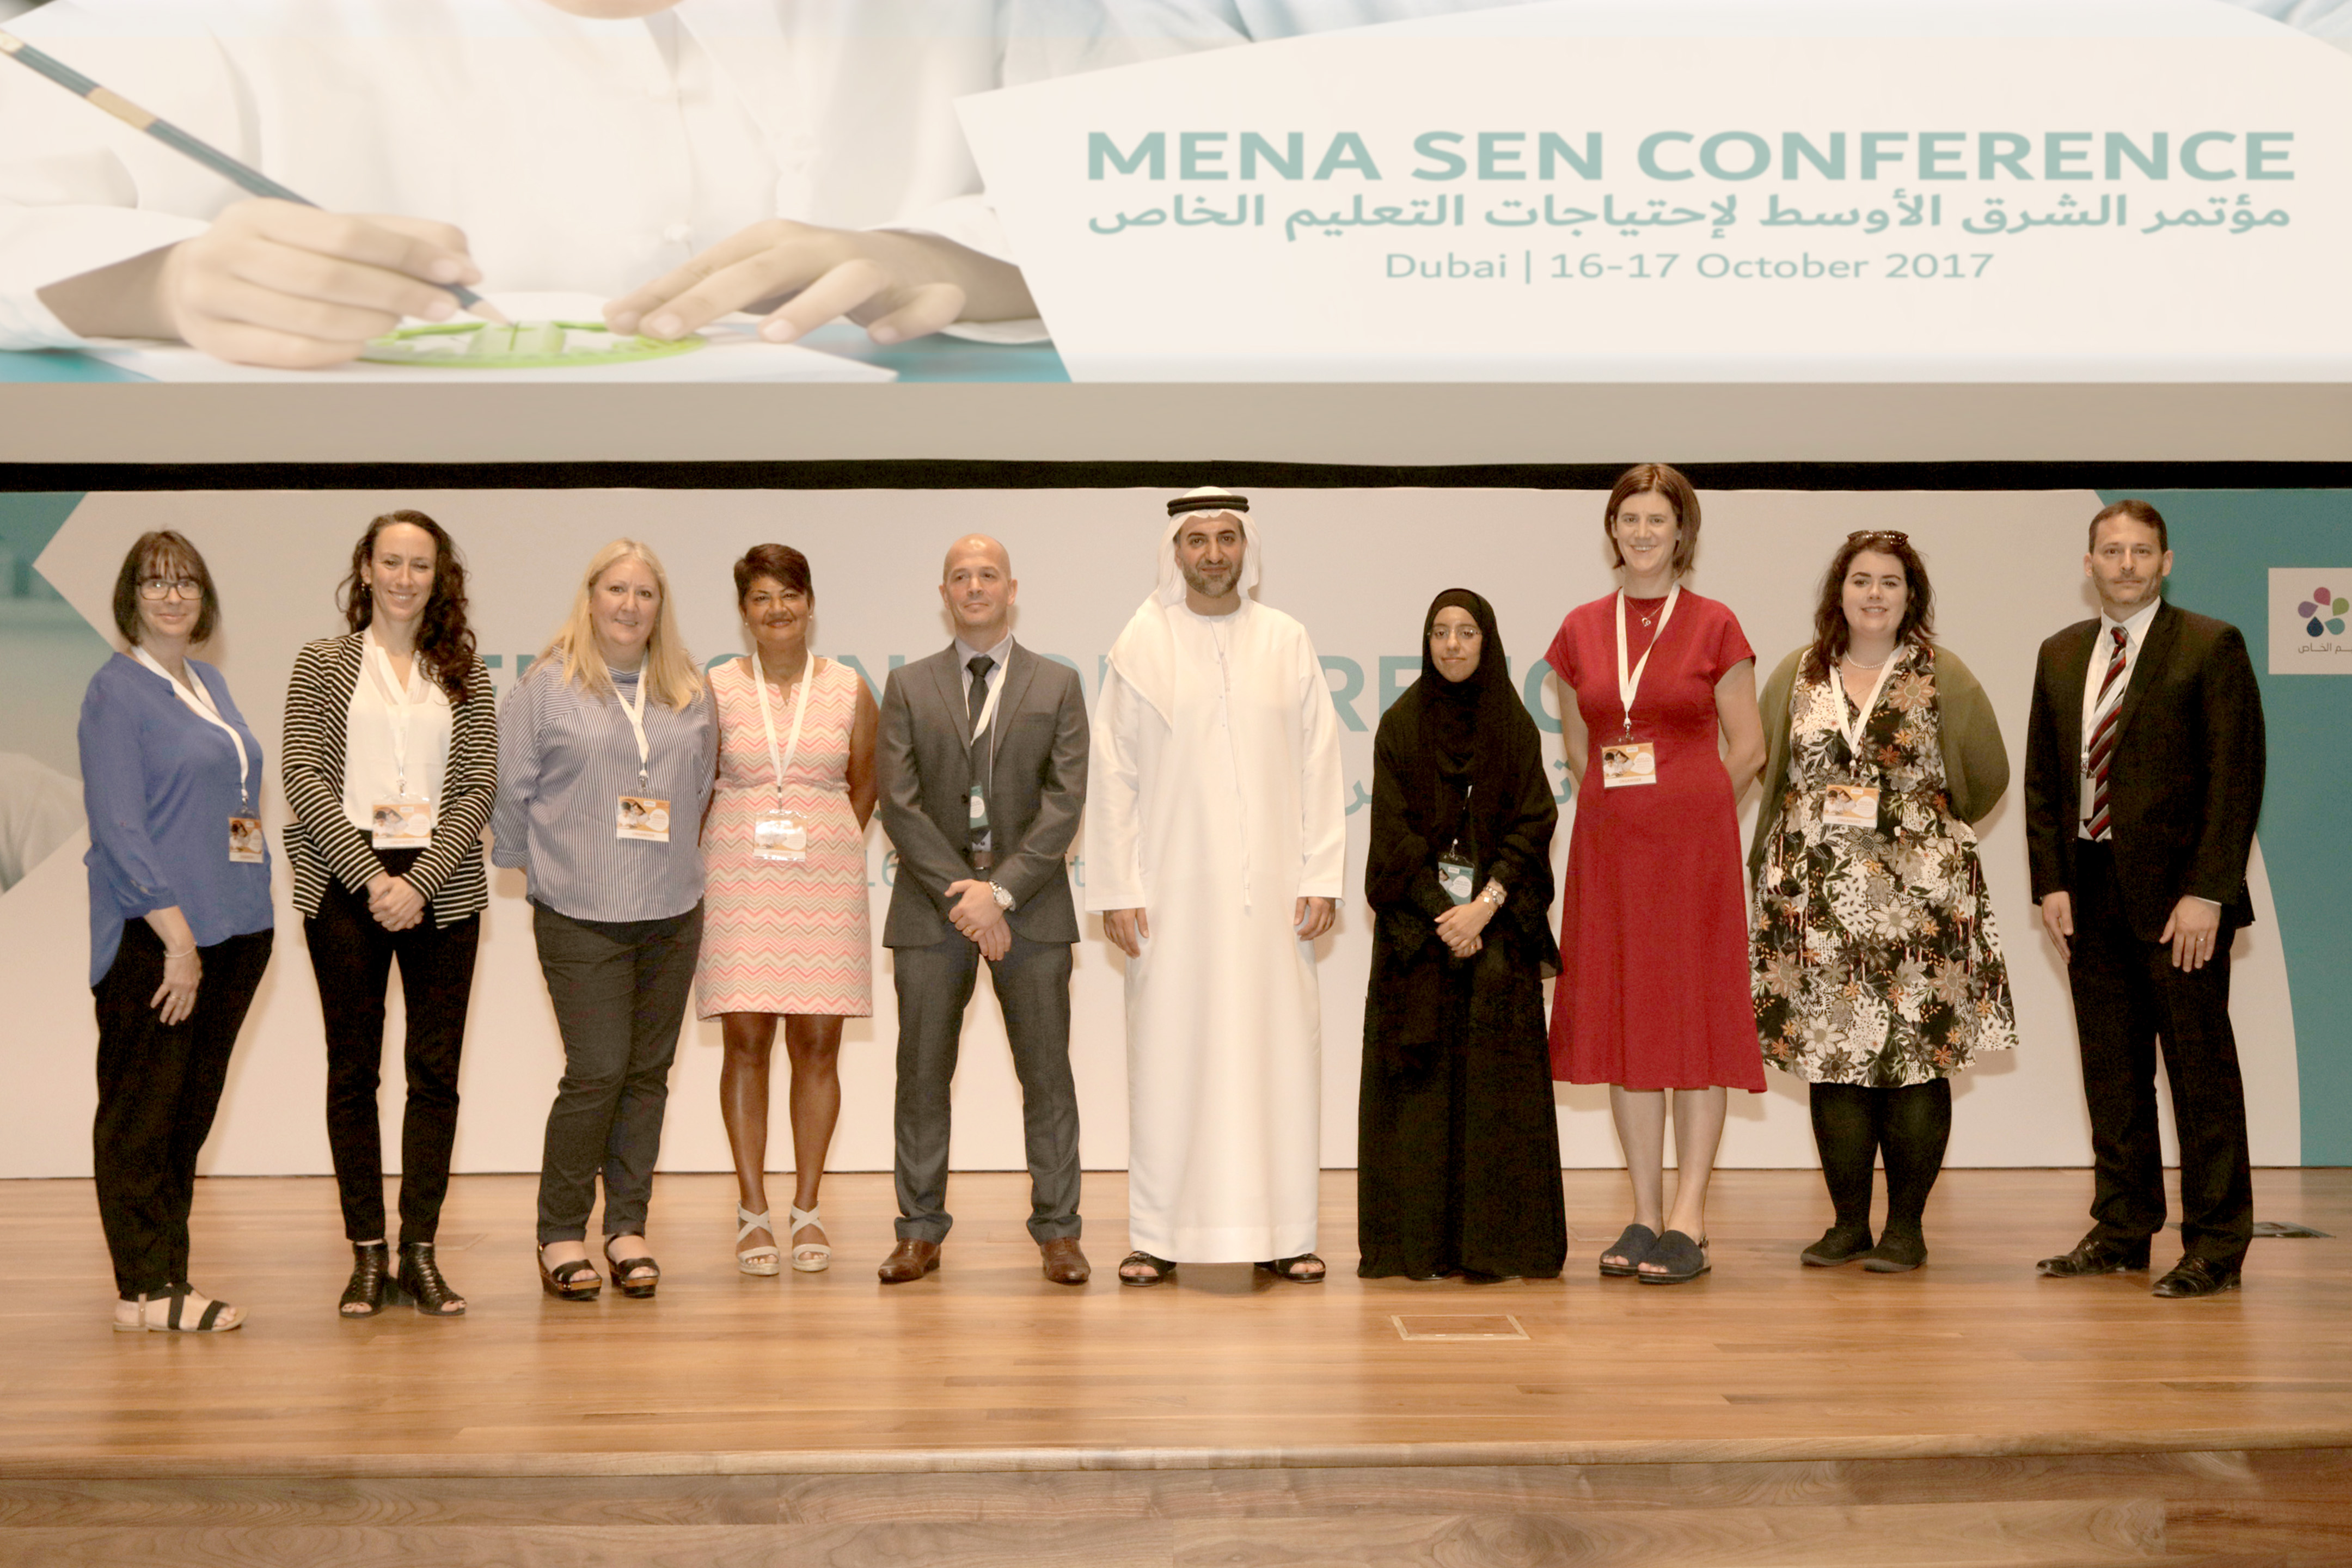 Al Jalila Foundation hosts the second annual  MENA SEN Conference in partnership with Dubai SEN Network